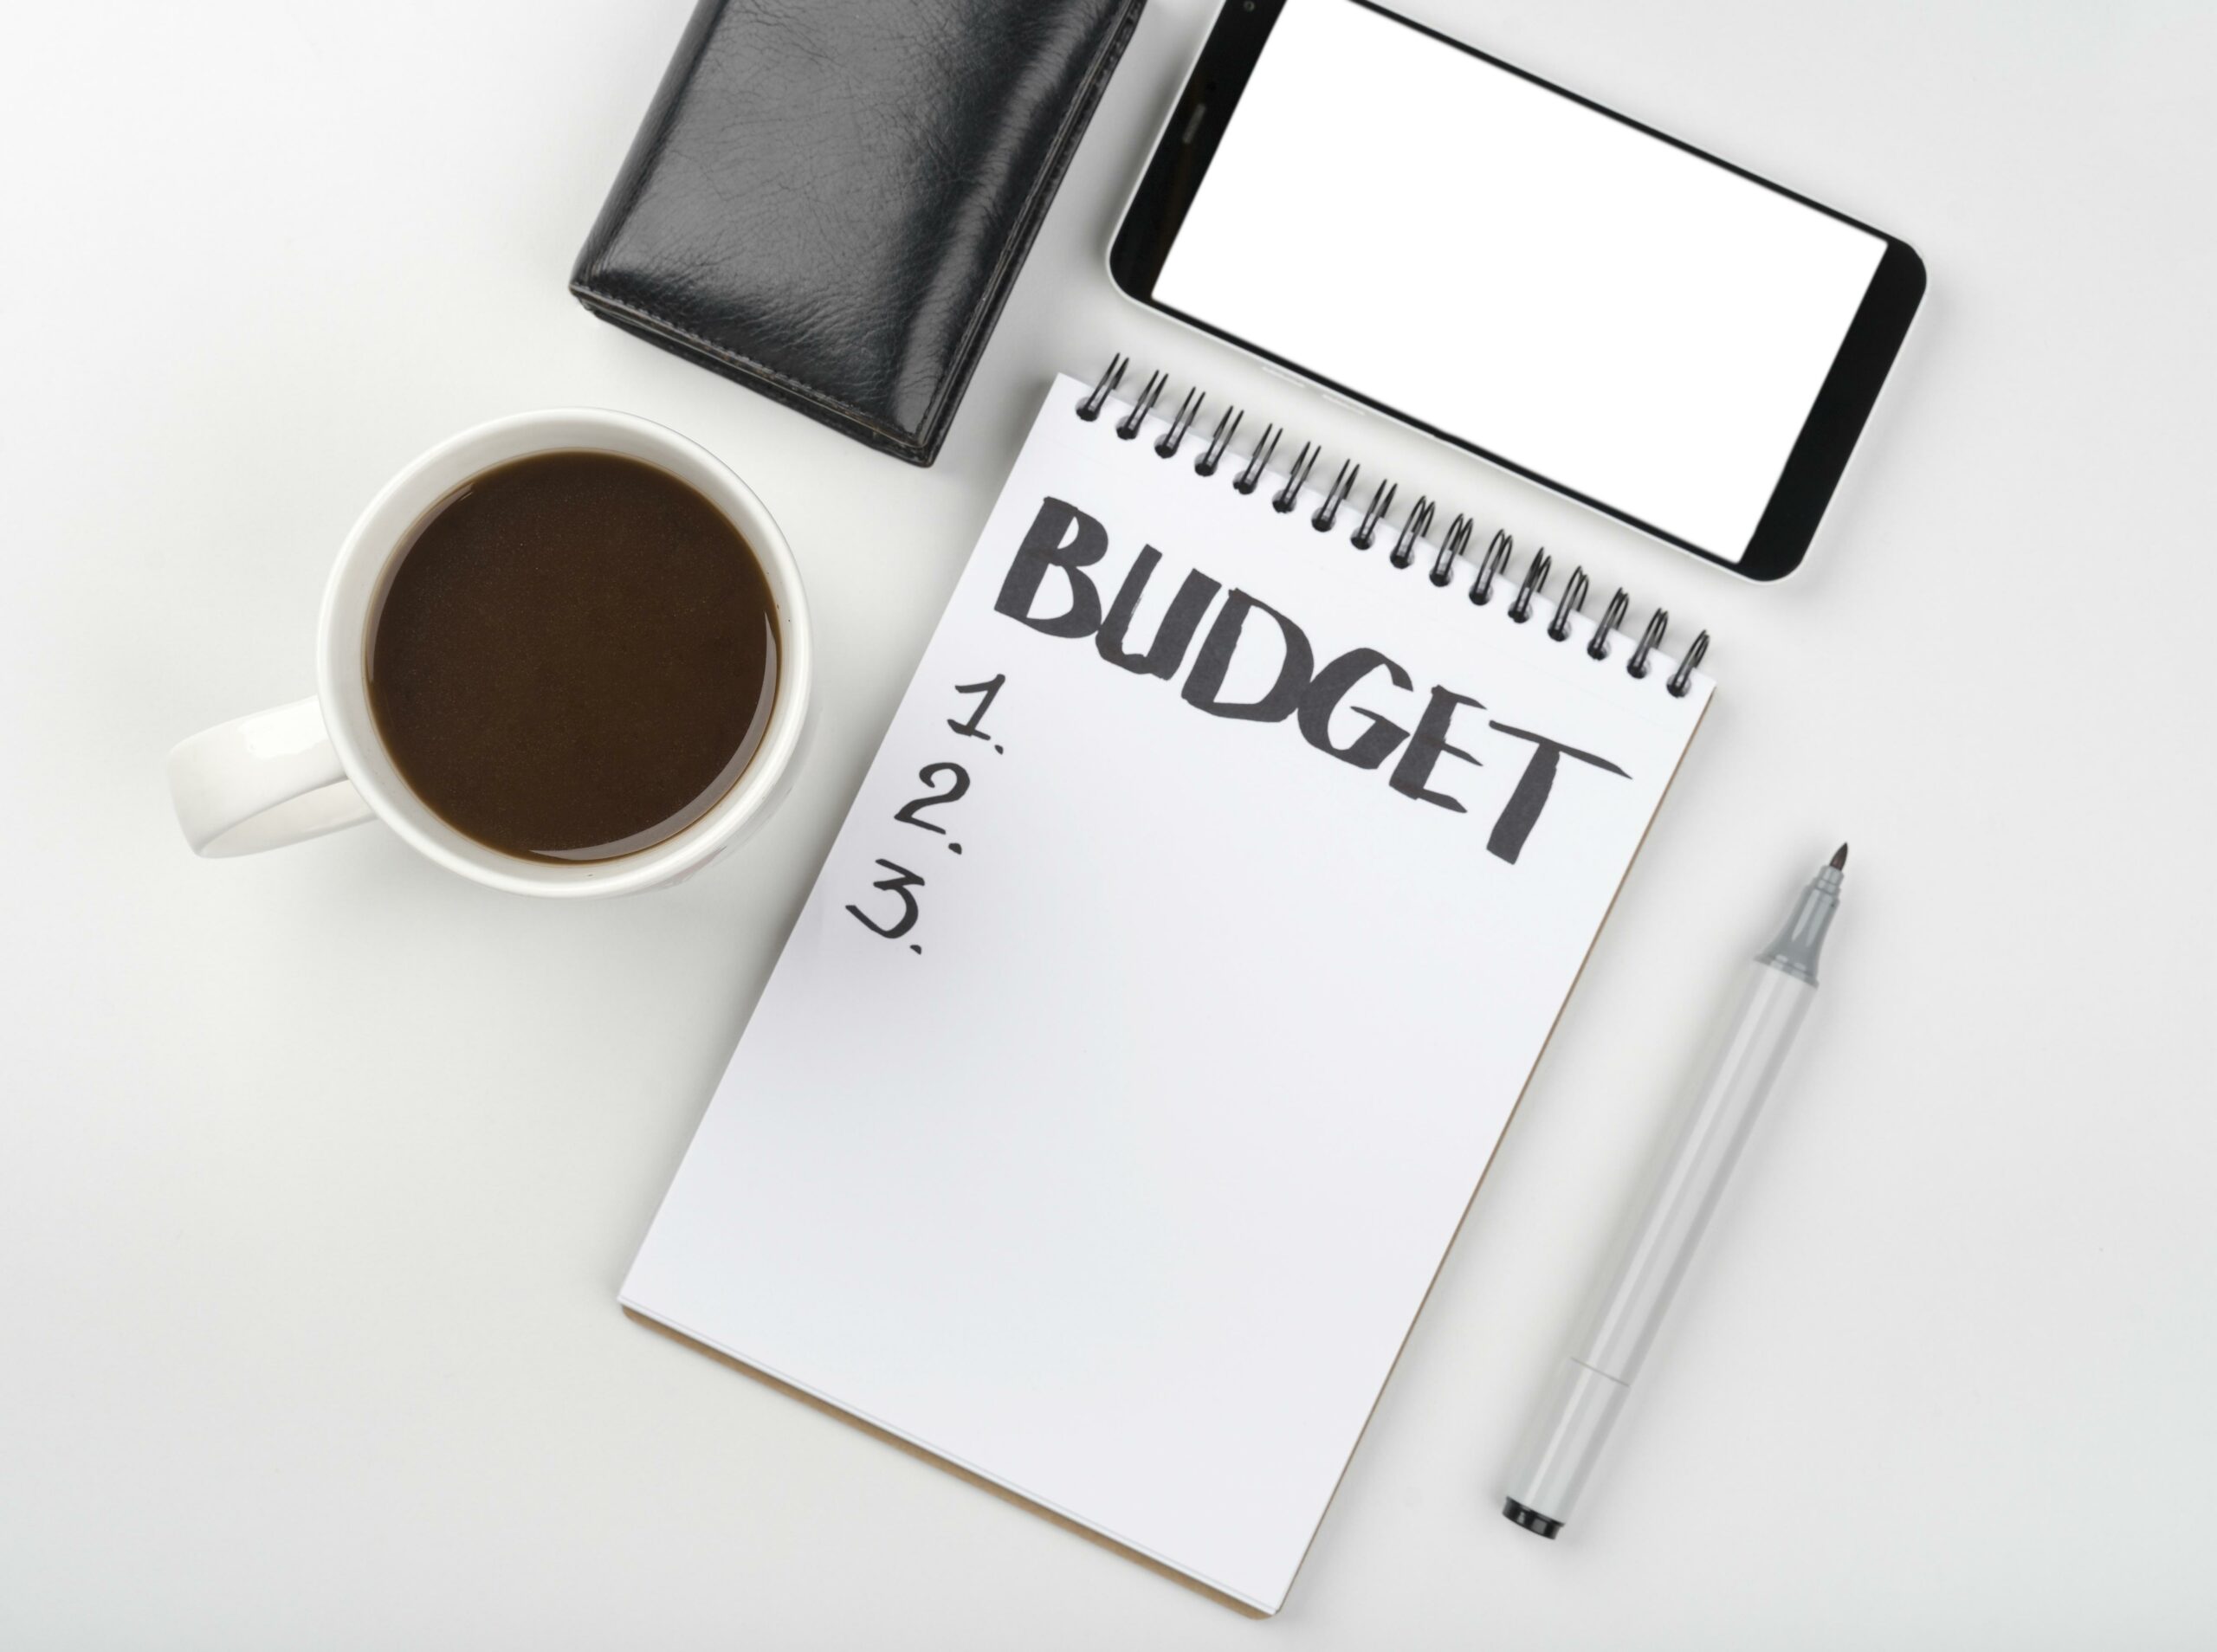 How to Choose the Right Budget Tracker